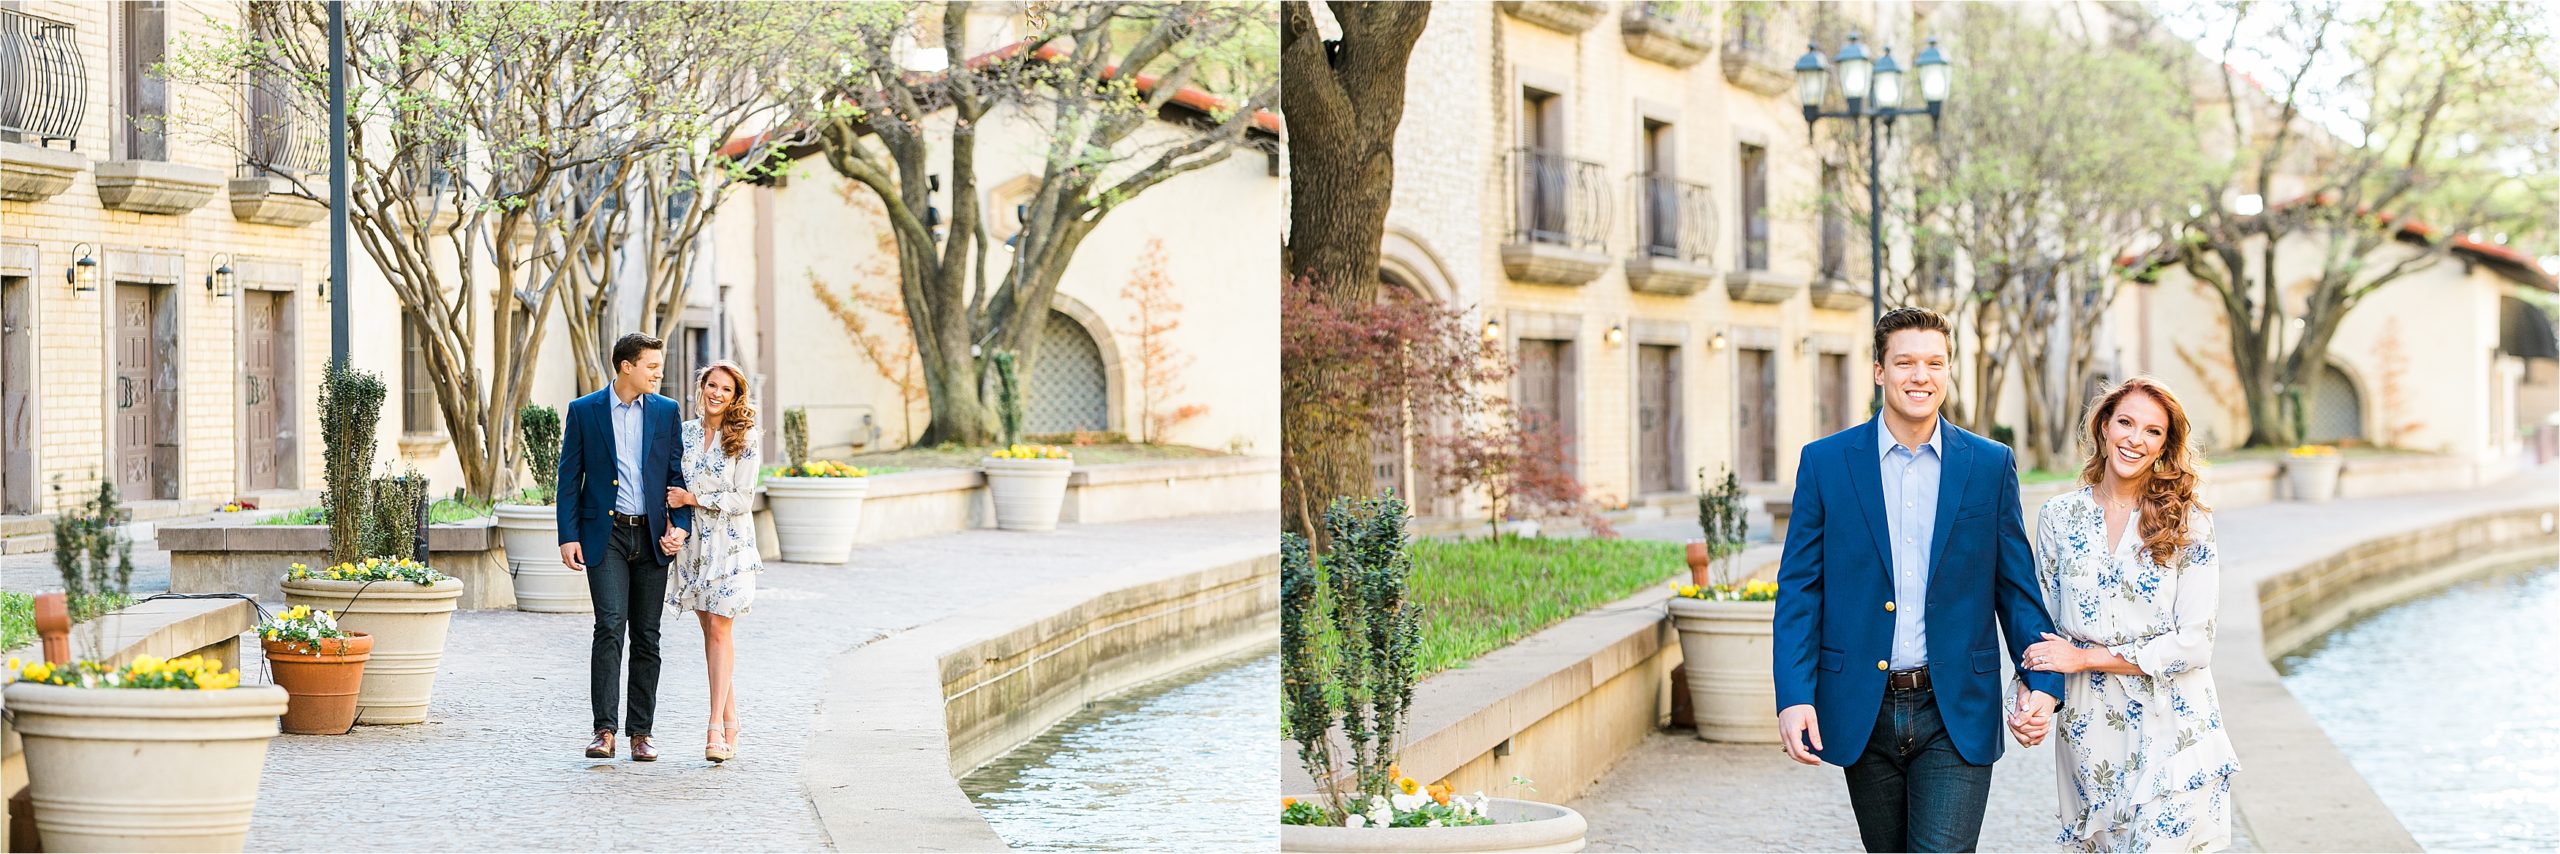 Miss Texas 2016 and her fiance walk along the mandalay canals dressed in navy and white for their San Antonio Inspired river walk engagement session 